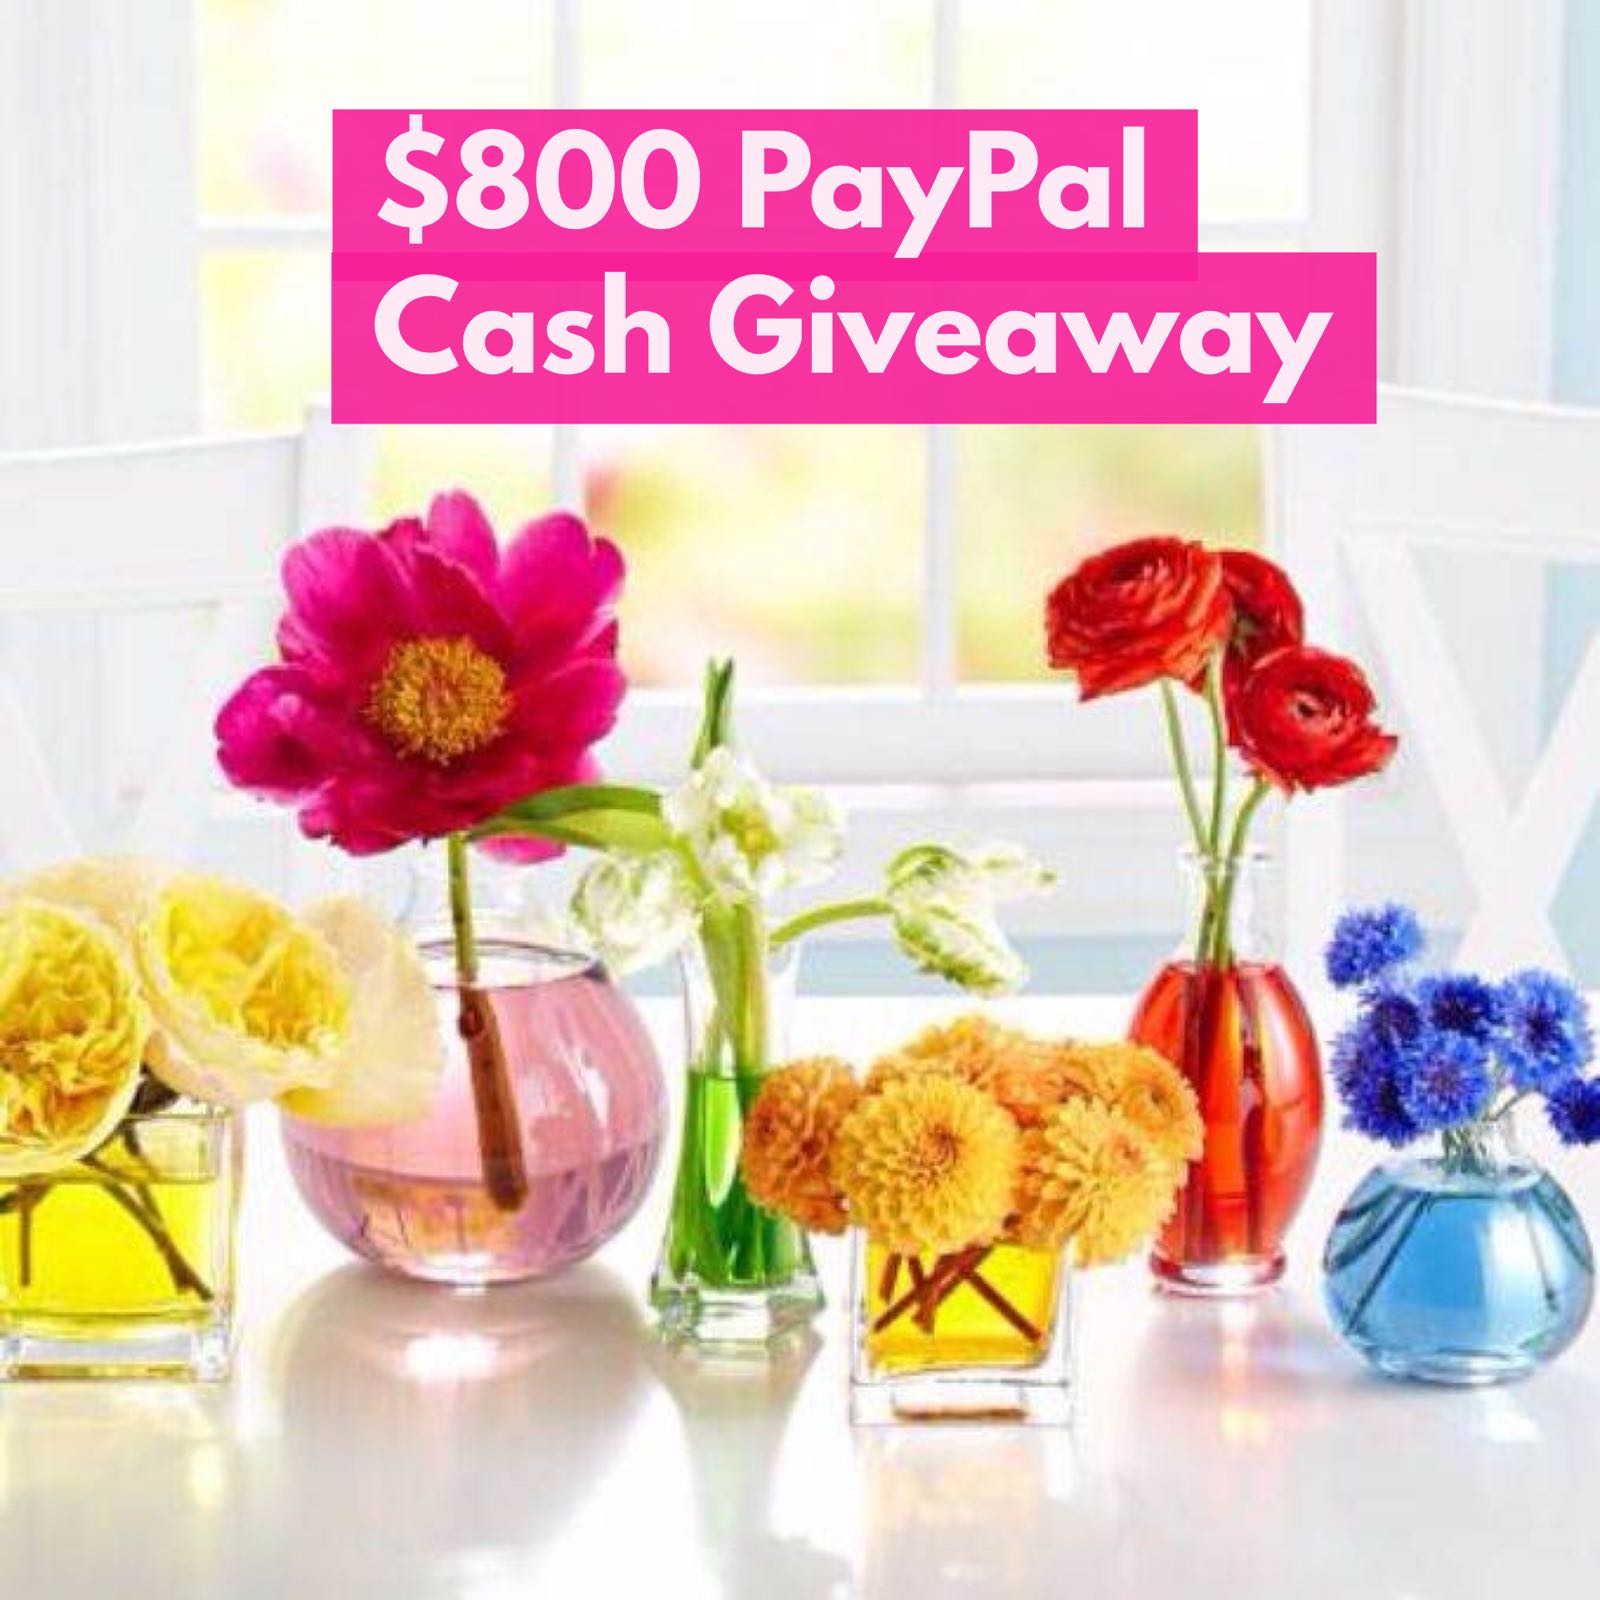 Here’s Your Chance to Win PayPal Cash!